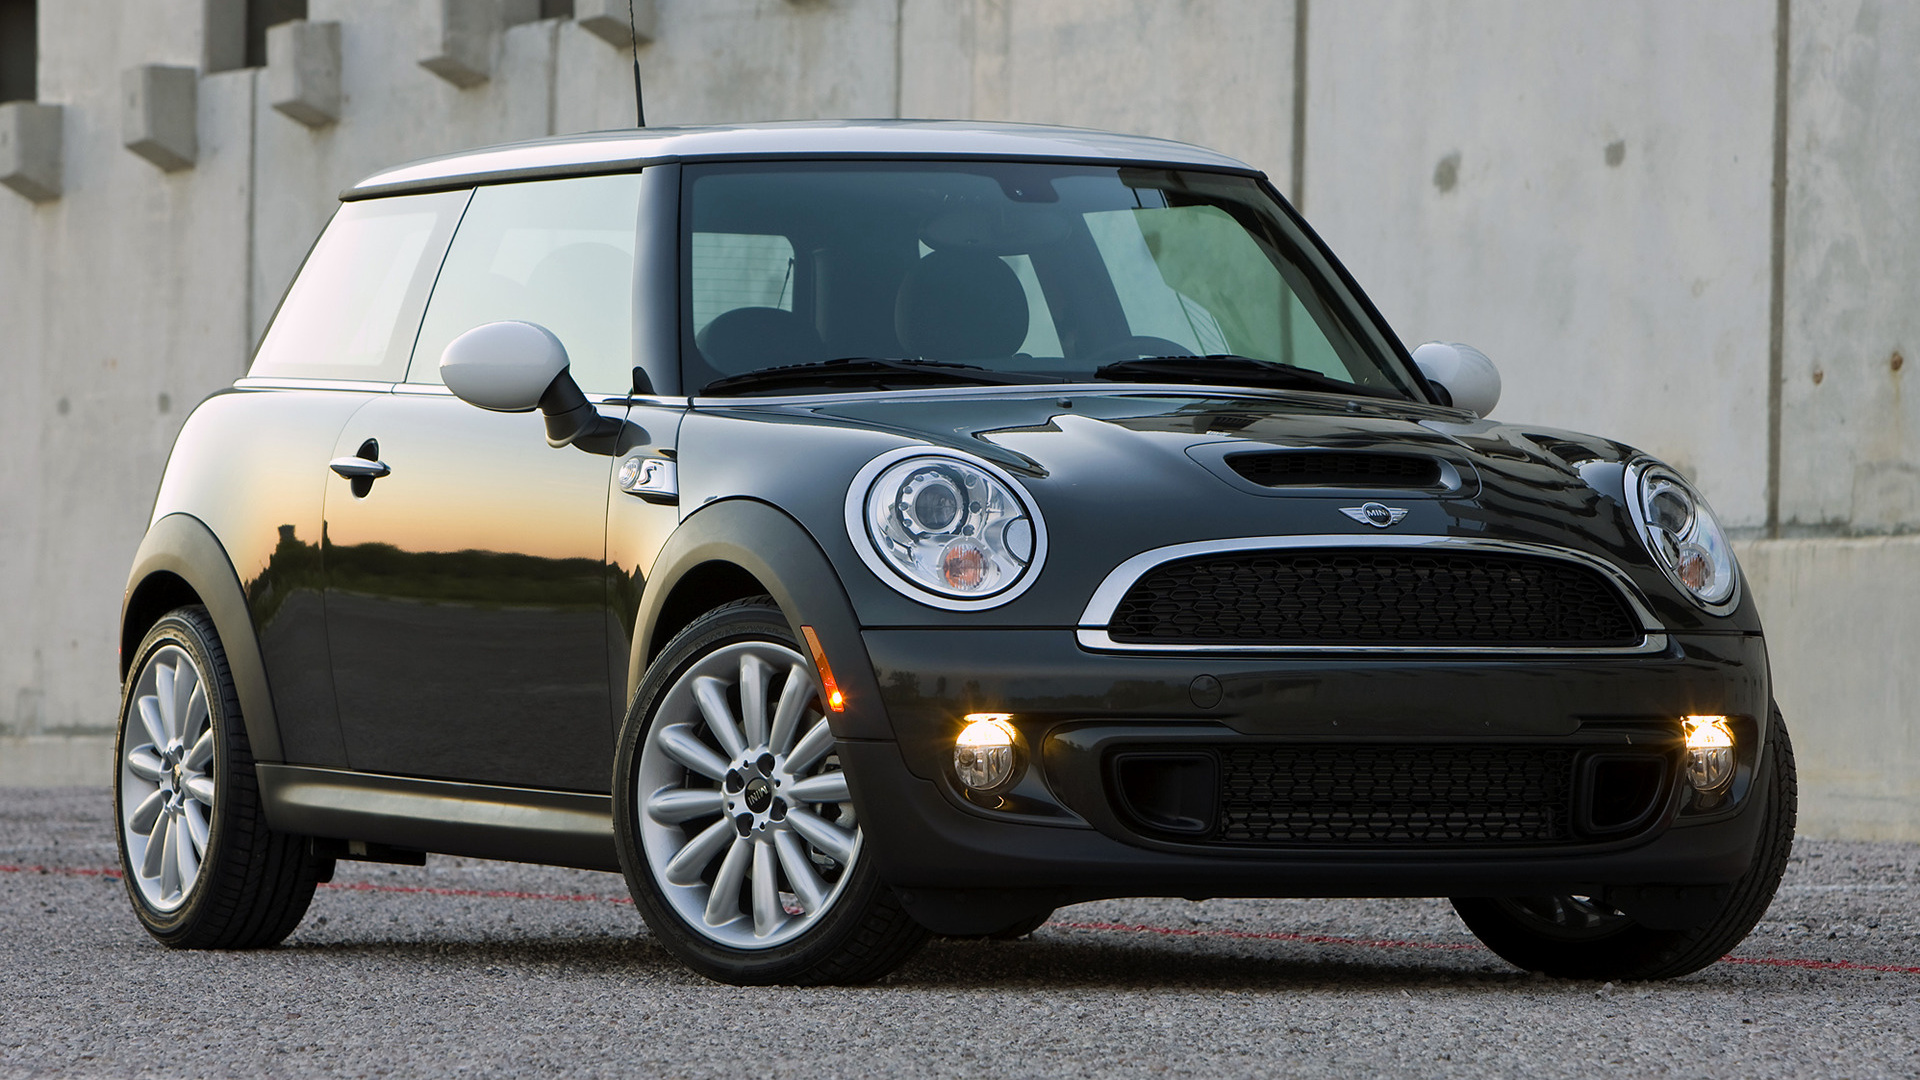 2010 Mini Cooper S (US) - Wallpapers and HD Images | Car Pixel